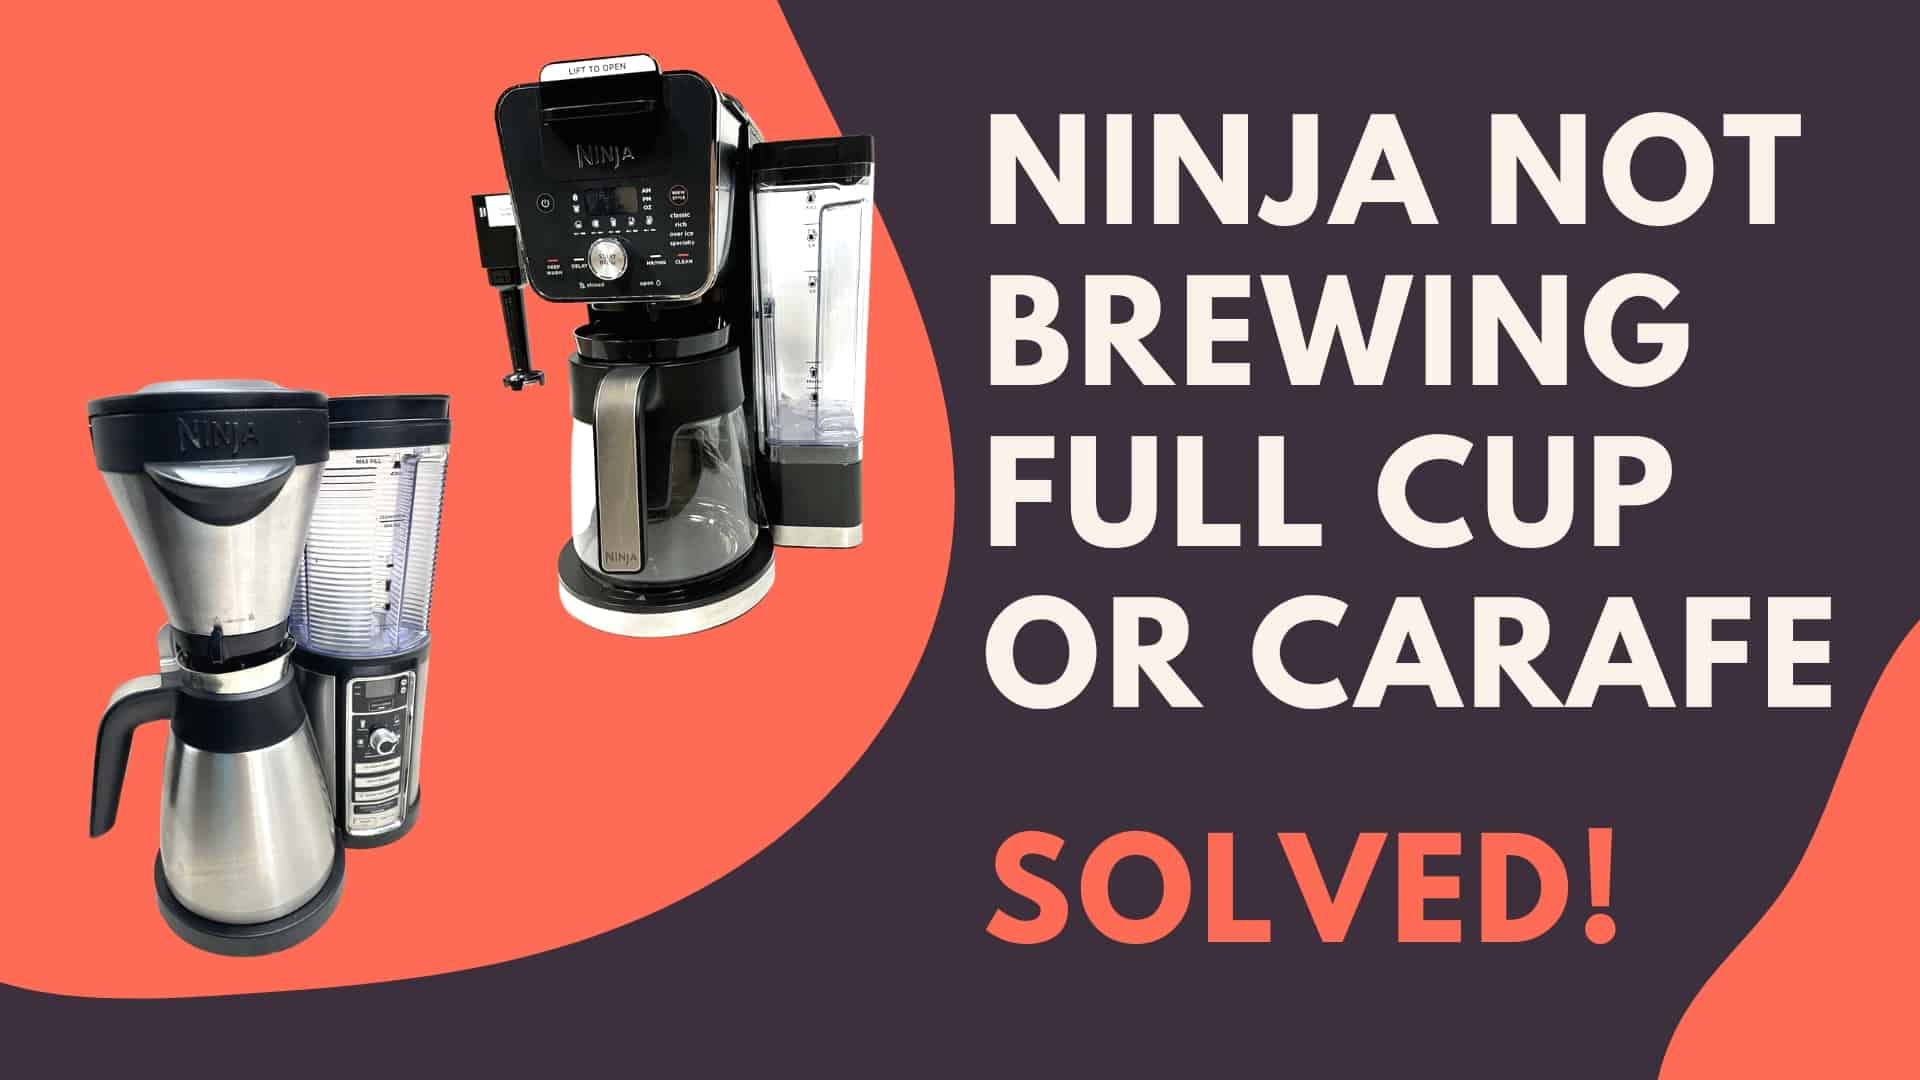 ninja Not Brewing Full cup or carafe